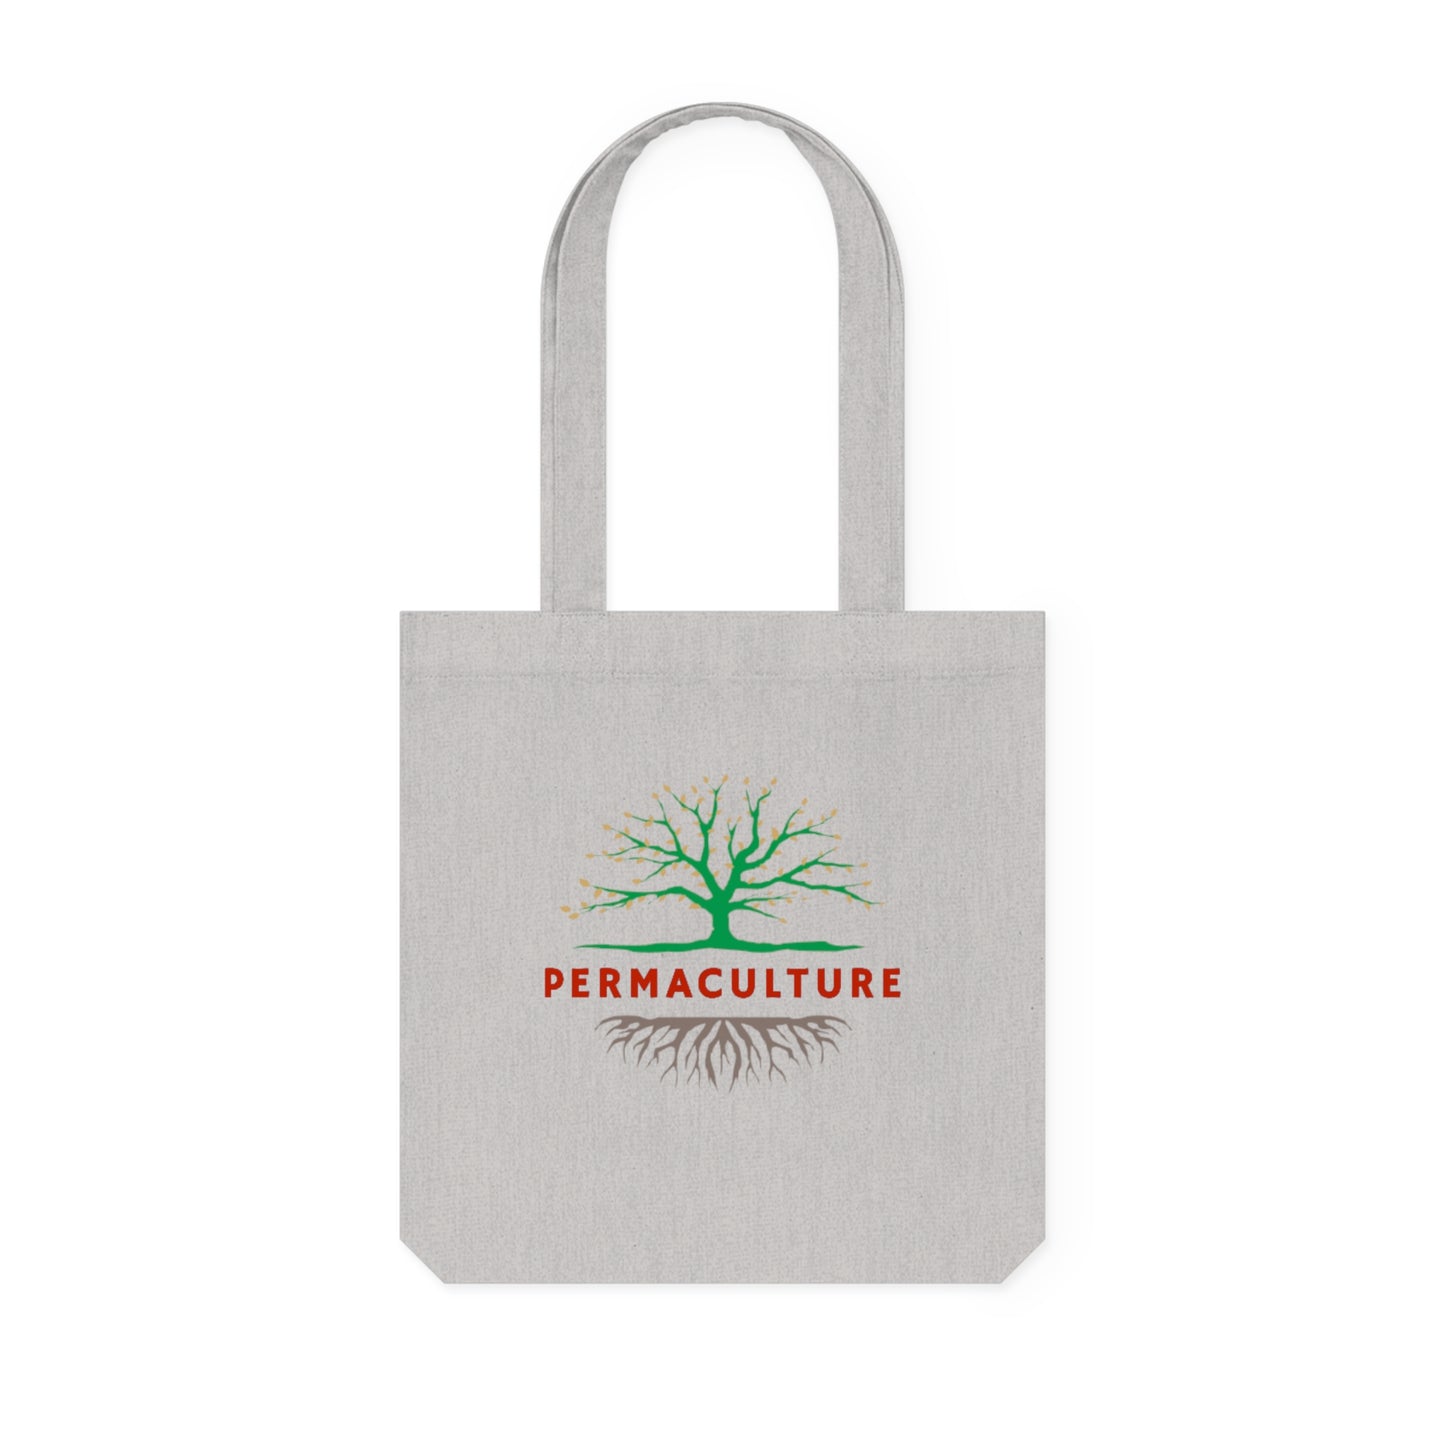 Permaculture Woven Tote Bag